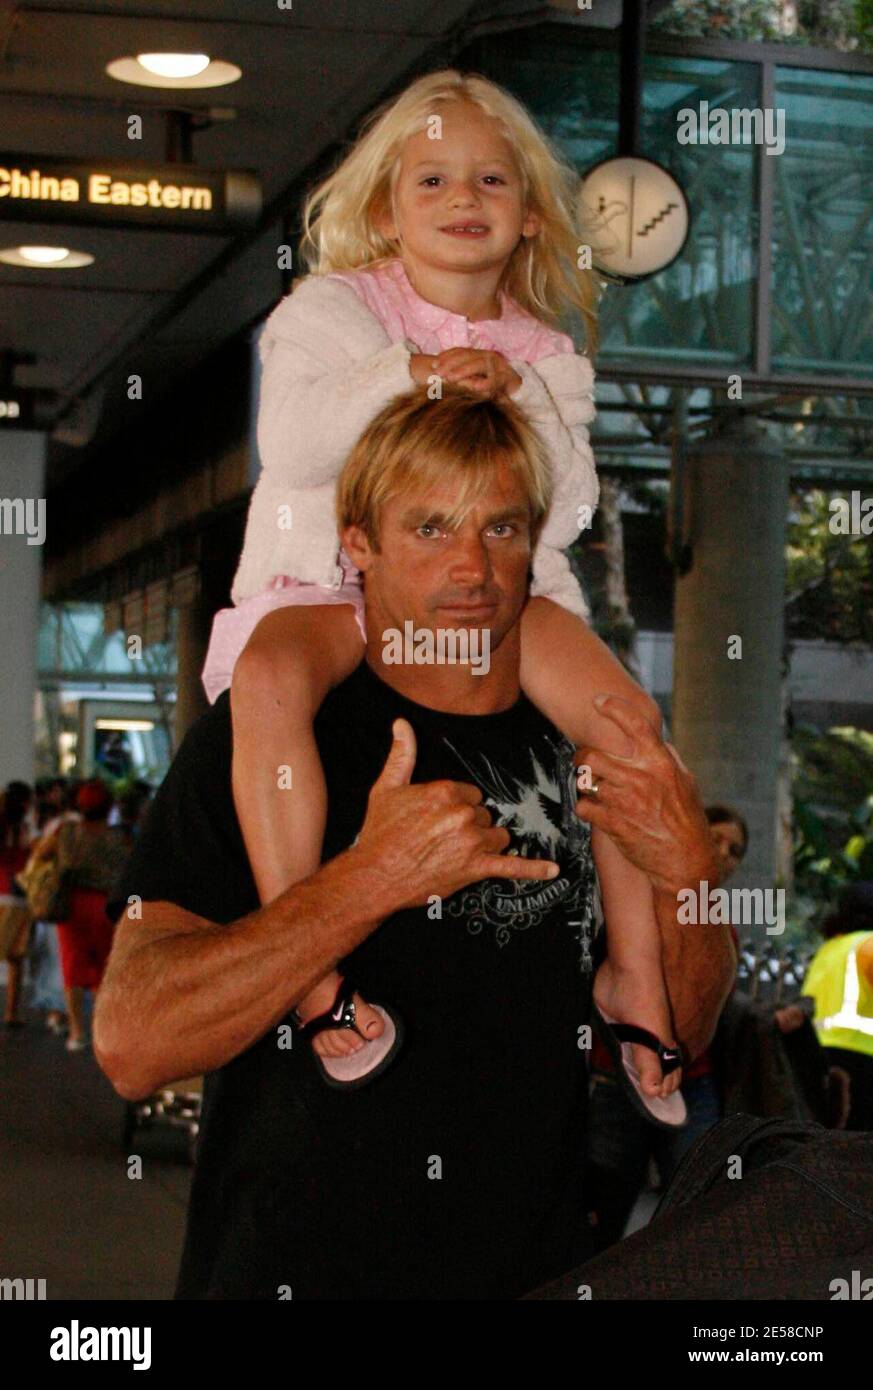 Exclusive!! Laird Hamilton, daughter Reece and wife Gabrielle Reece arrive at LAX airport. Los Angeles, Calif. 7/12/07.   [[wam]] Stock Photo